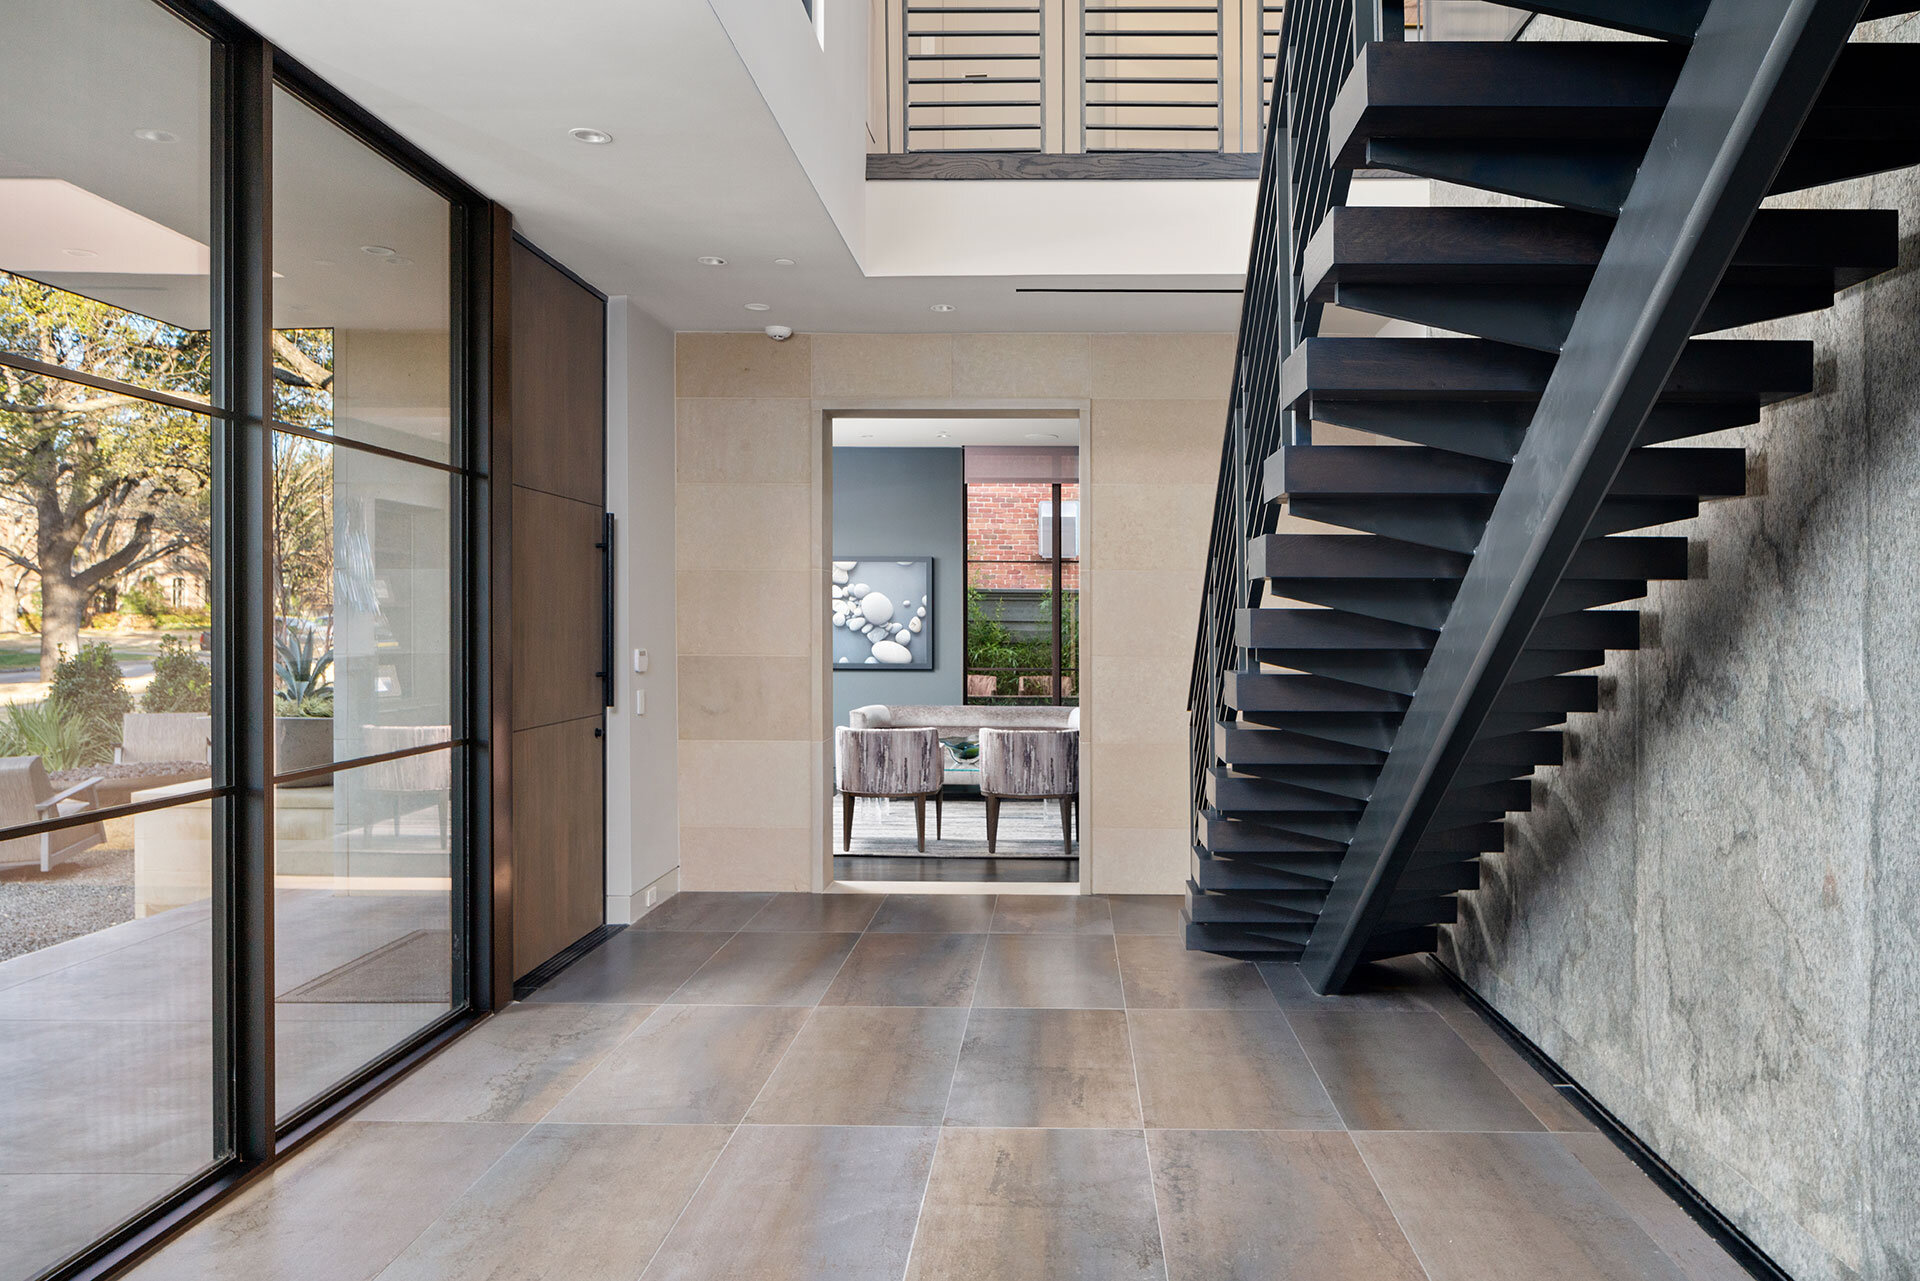  Urban contemporary home in University Park, Texas featuring dramatic foyer space with single stringer steel and wood stair 